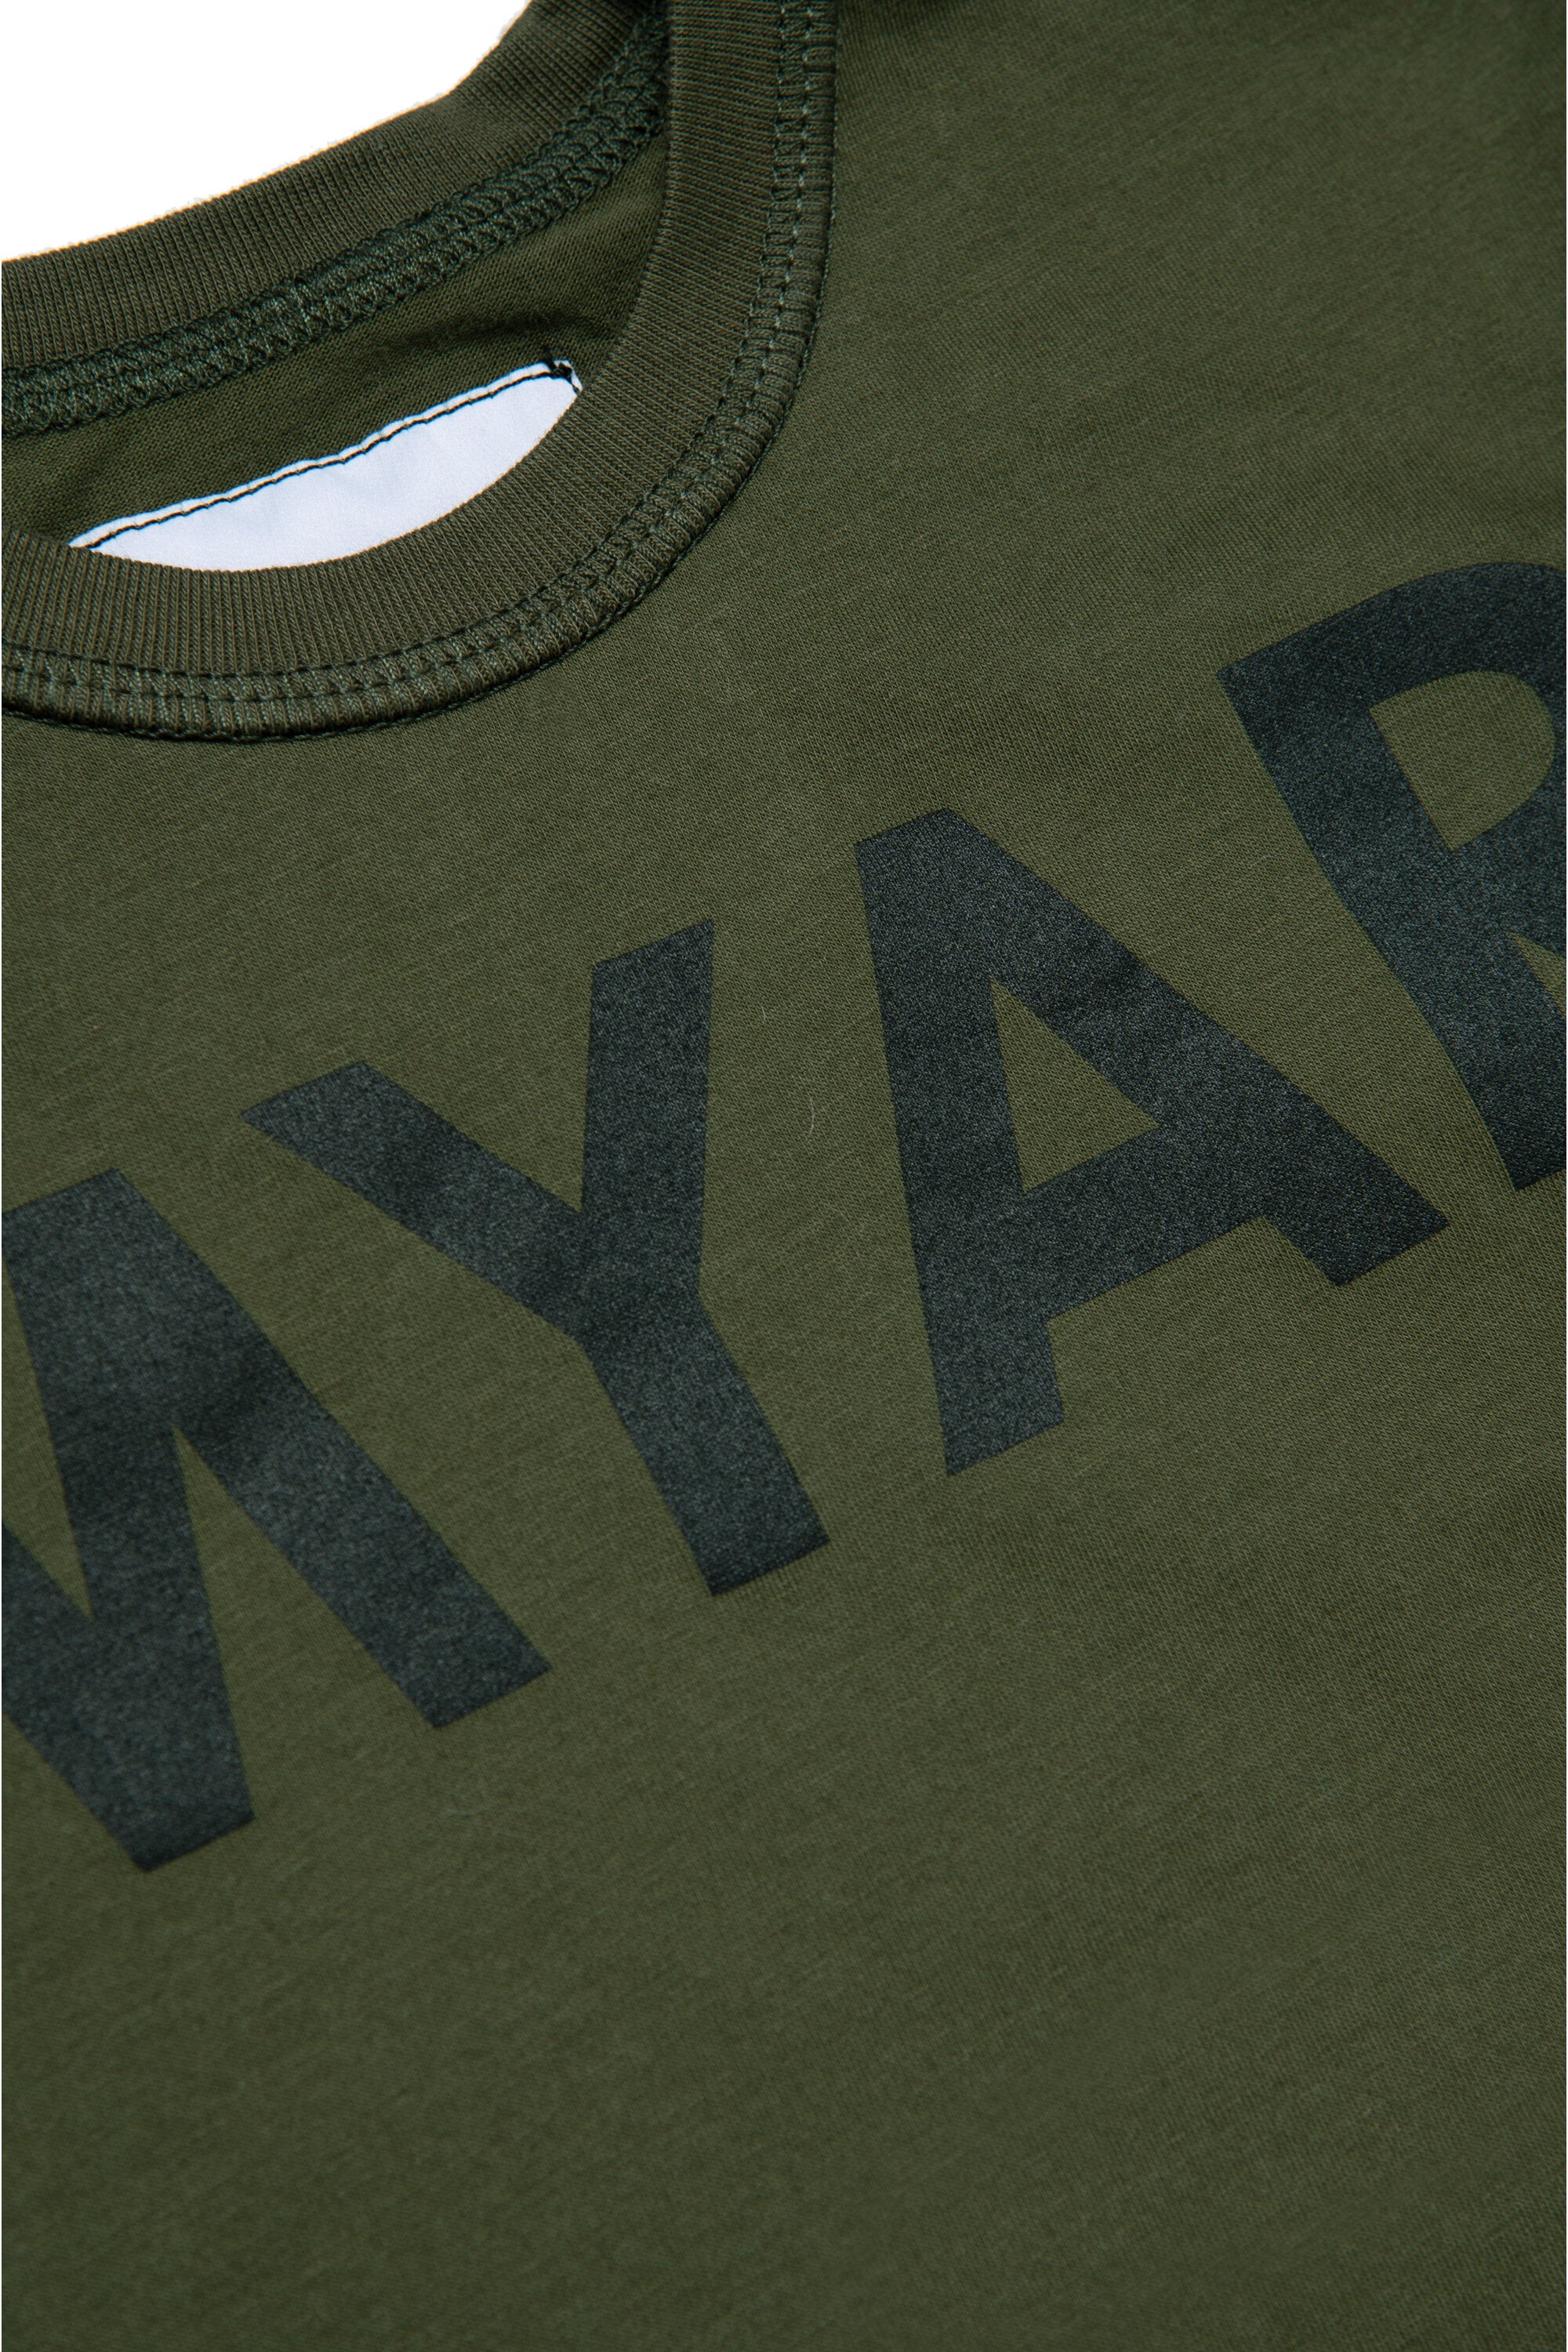 Deadstock cotton t-shirt with MYAR logo